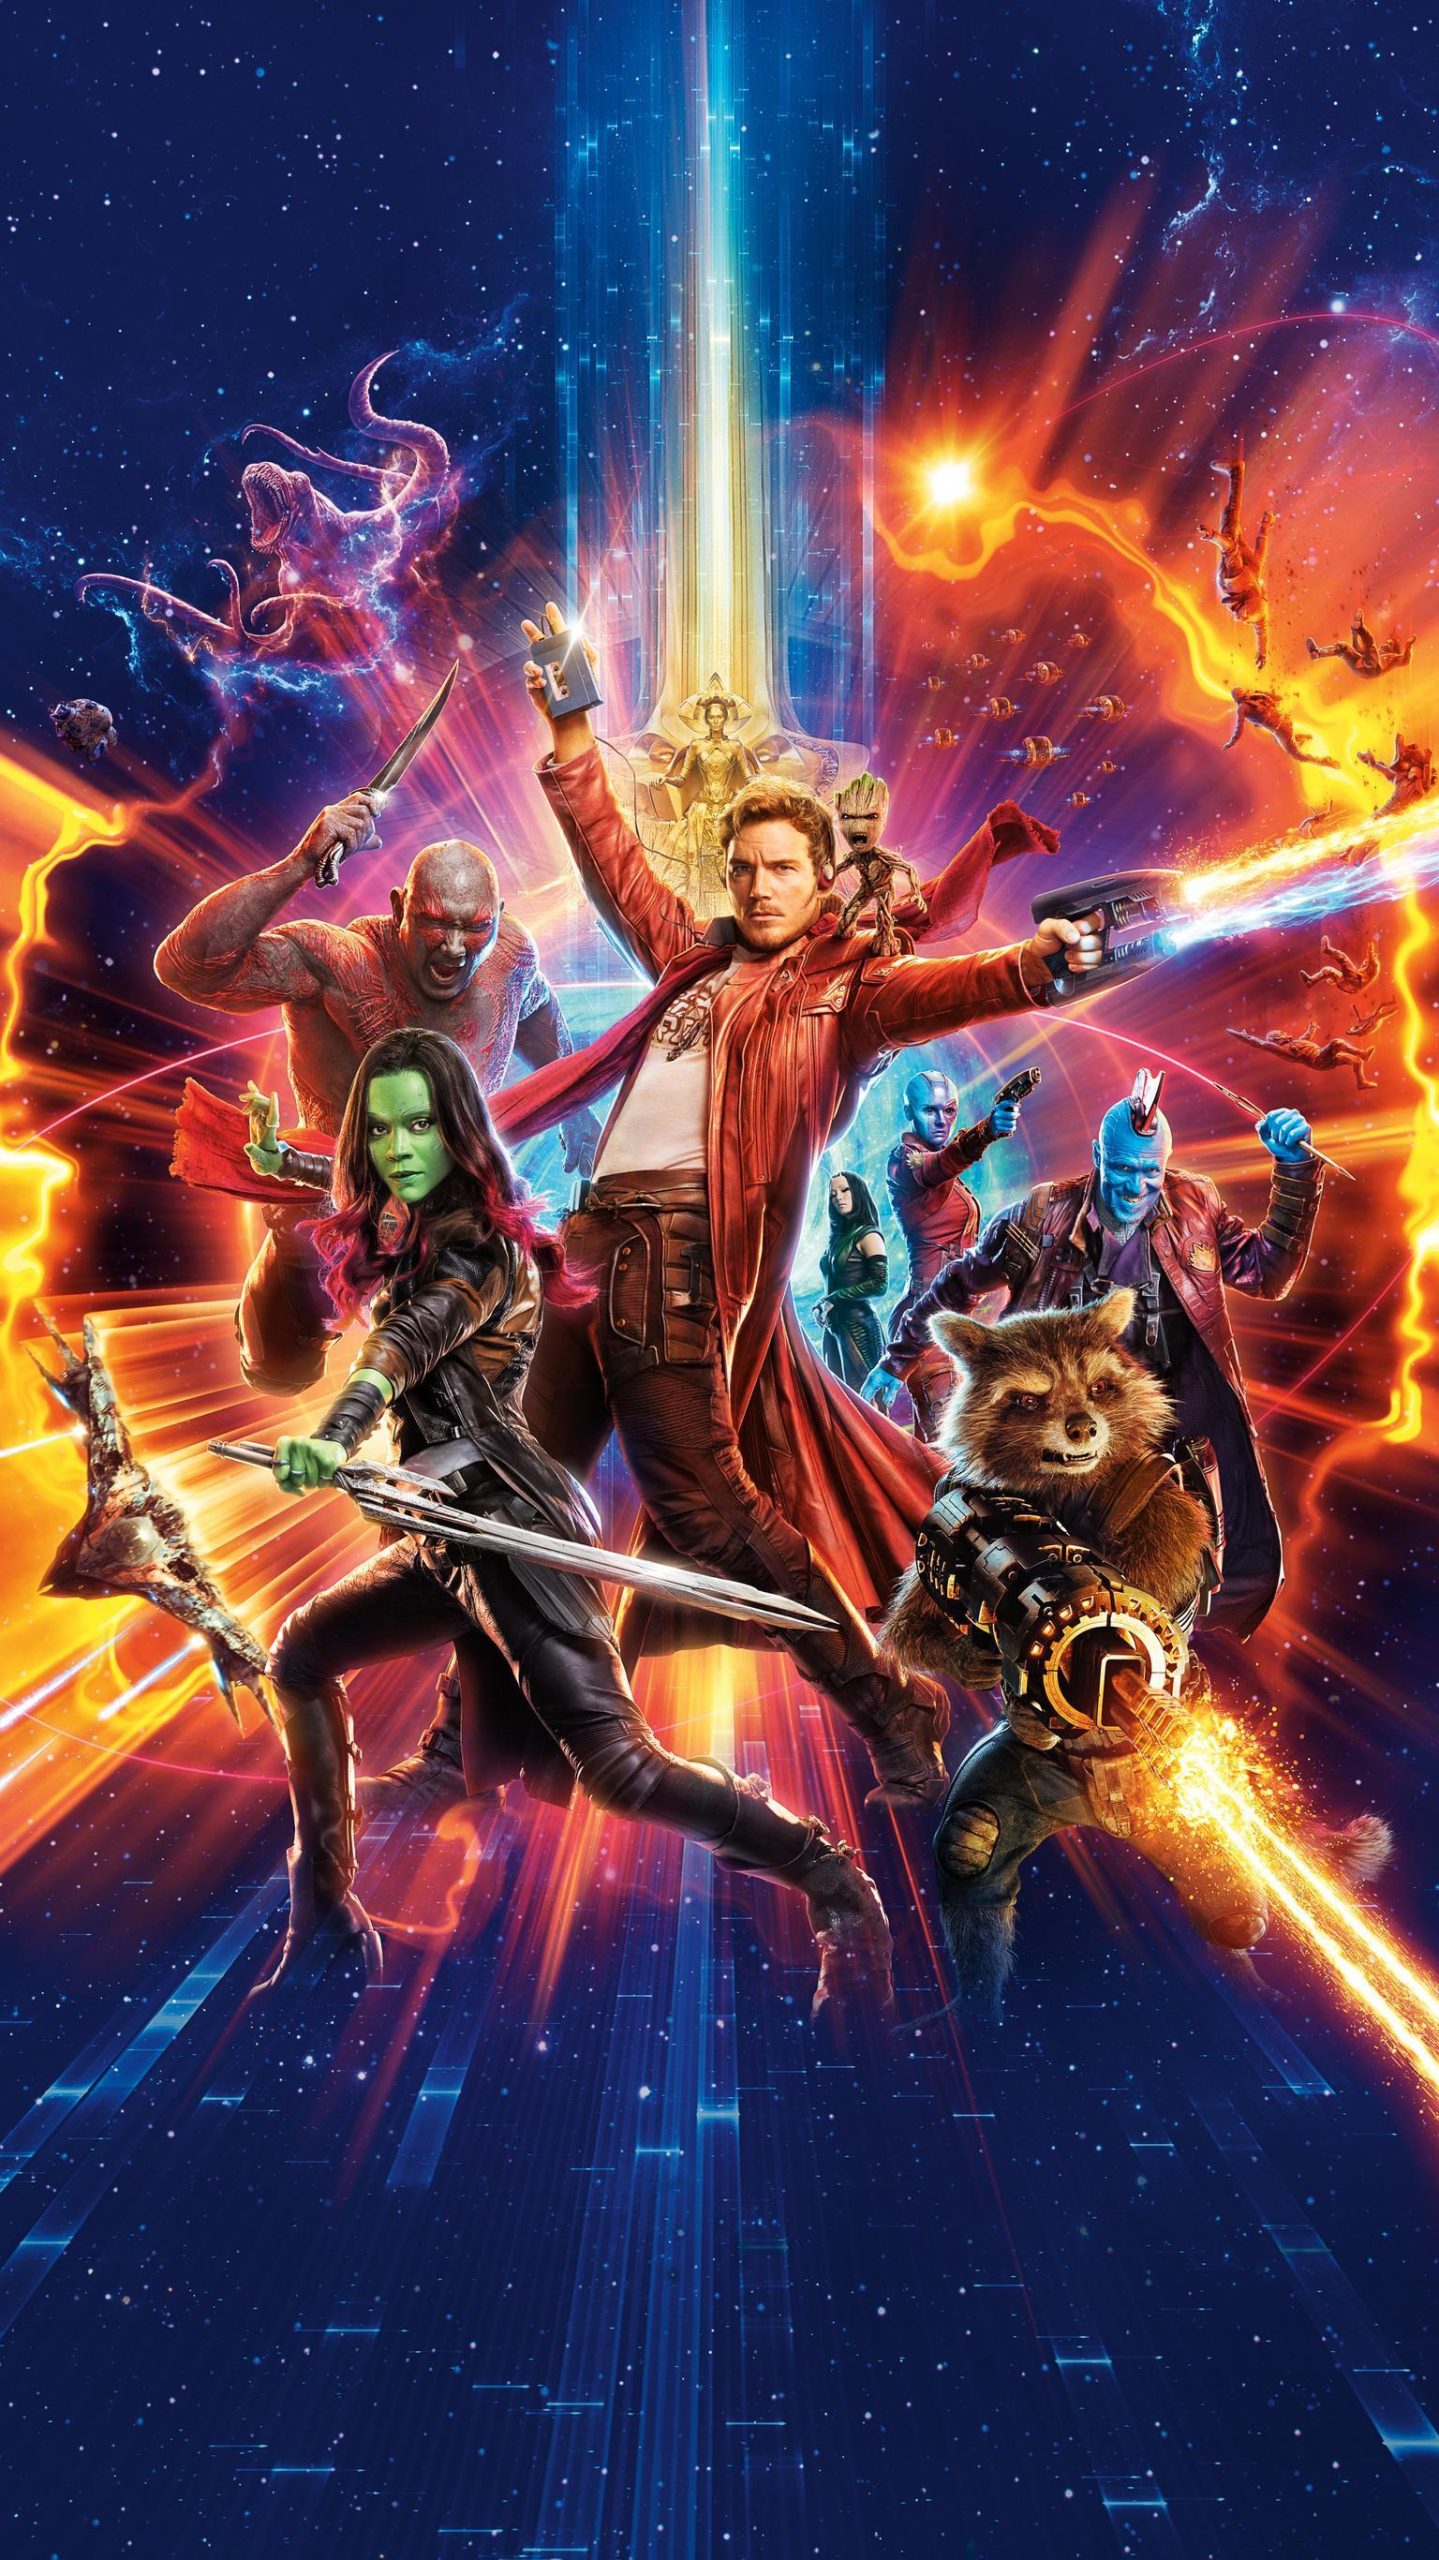 Guardian Of The Galaxy iPhone 1080p Wallpaper, Guardian Of The Galaxy iPhone, Movies